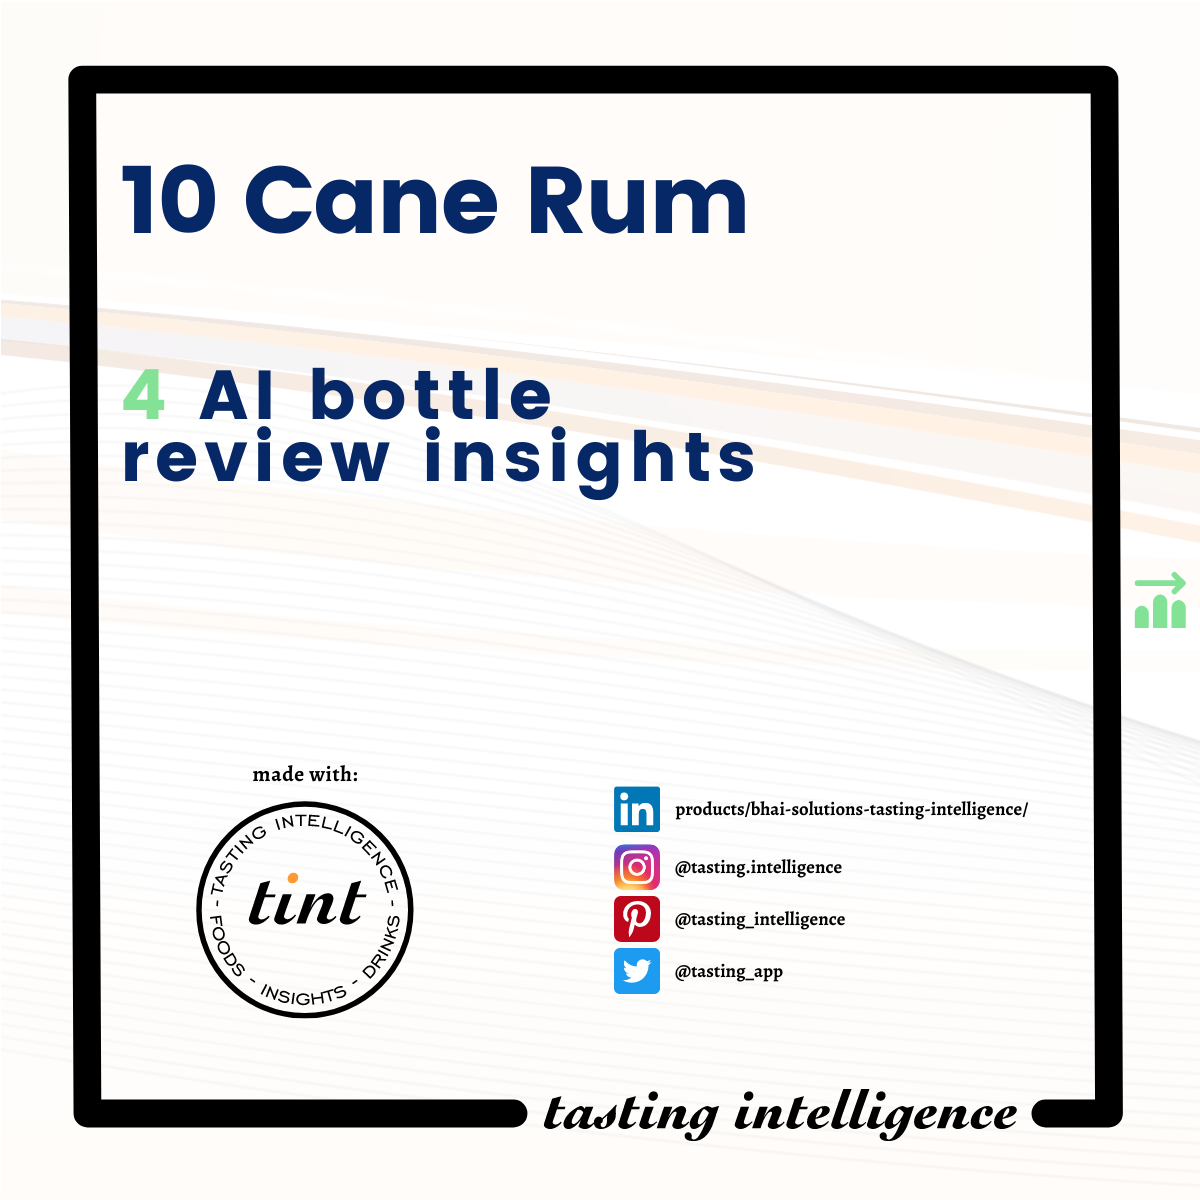 4 bottle review insights of 10 Cane Rum